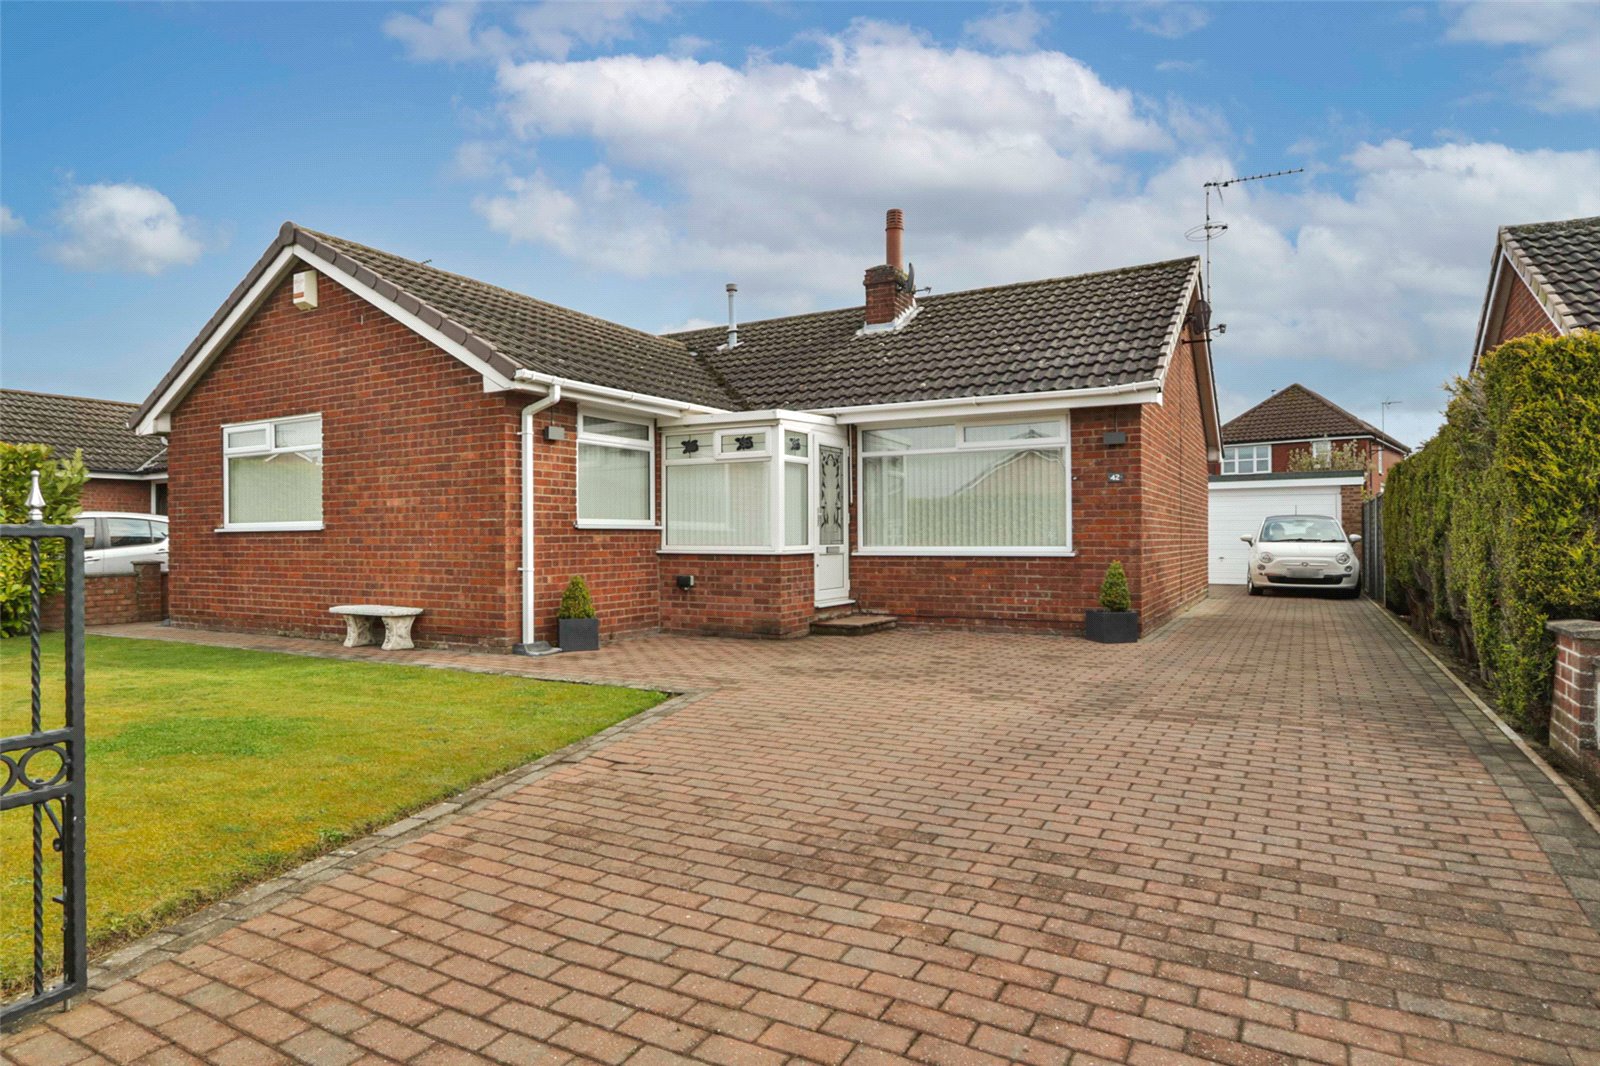 3 bed bungalow for sale in The Meadows, Leven - Property Image 1